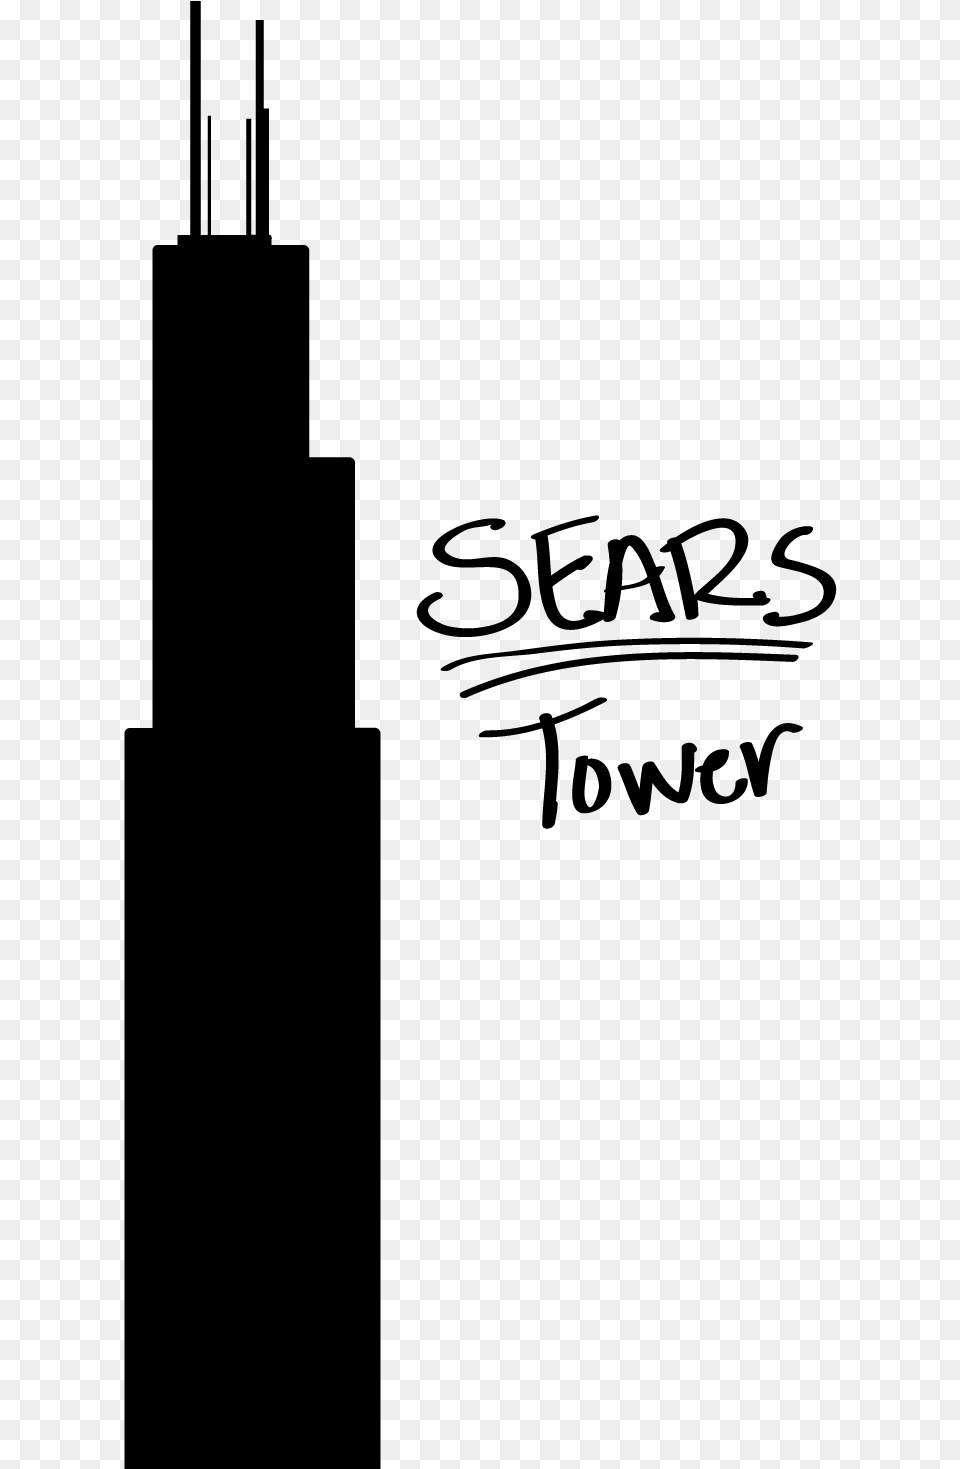 Once The Buildings Were Finished They Were The Tallest Sears Tower Illustration, Gray Free Transparent Png